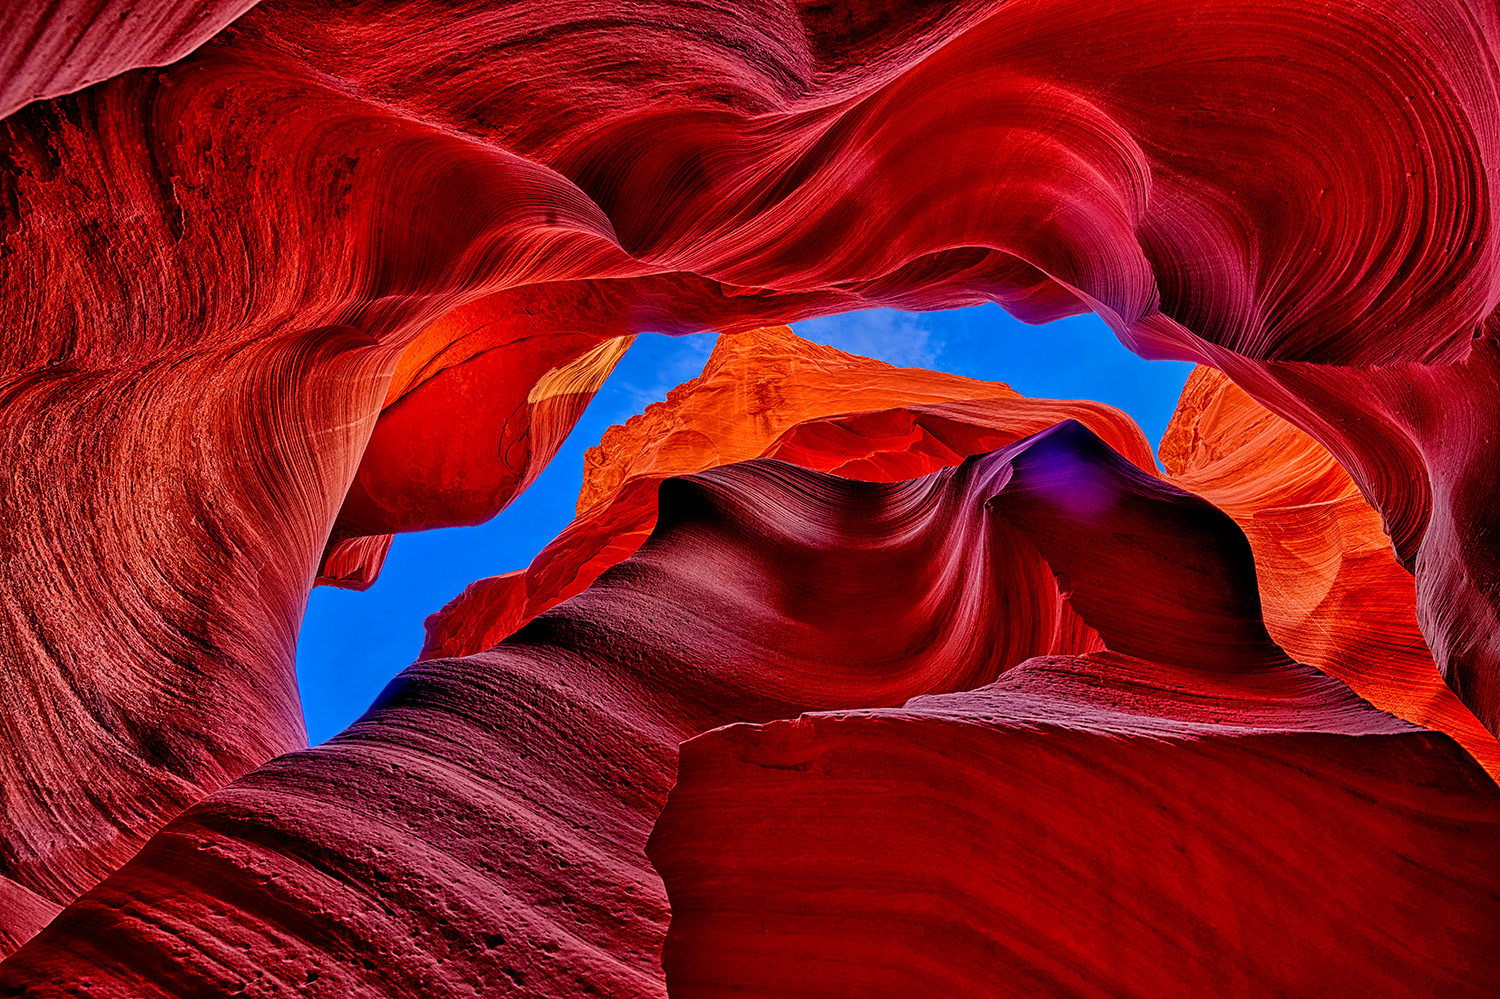 Fire Beneath the Sky in Antelope Canyon